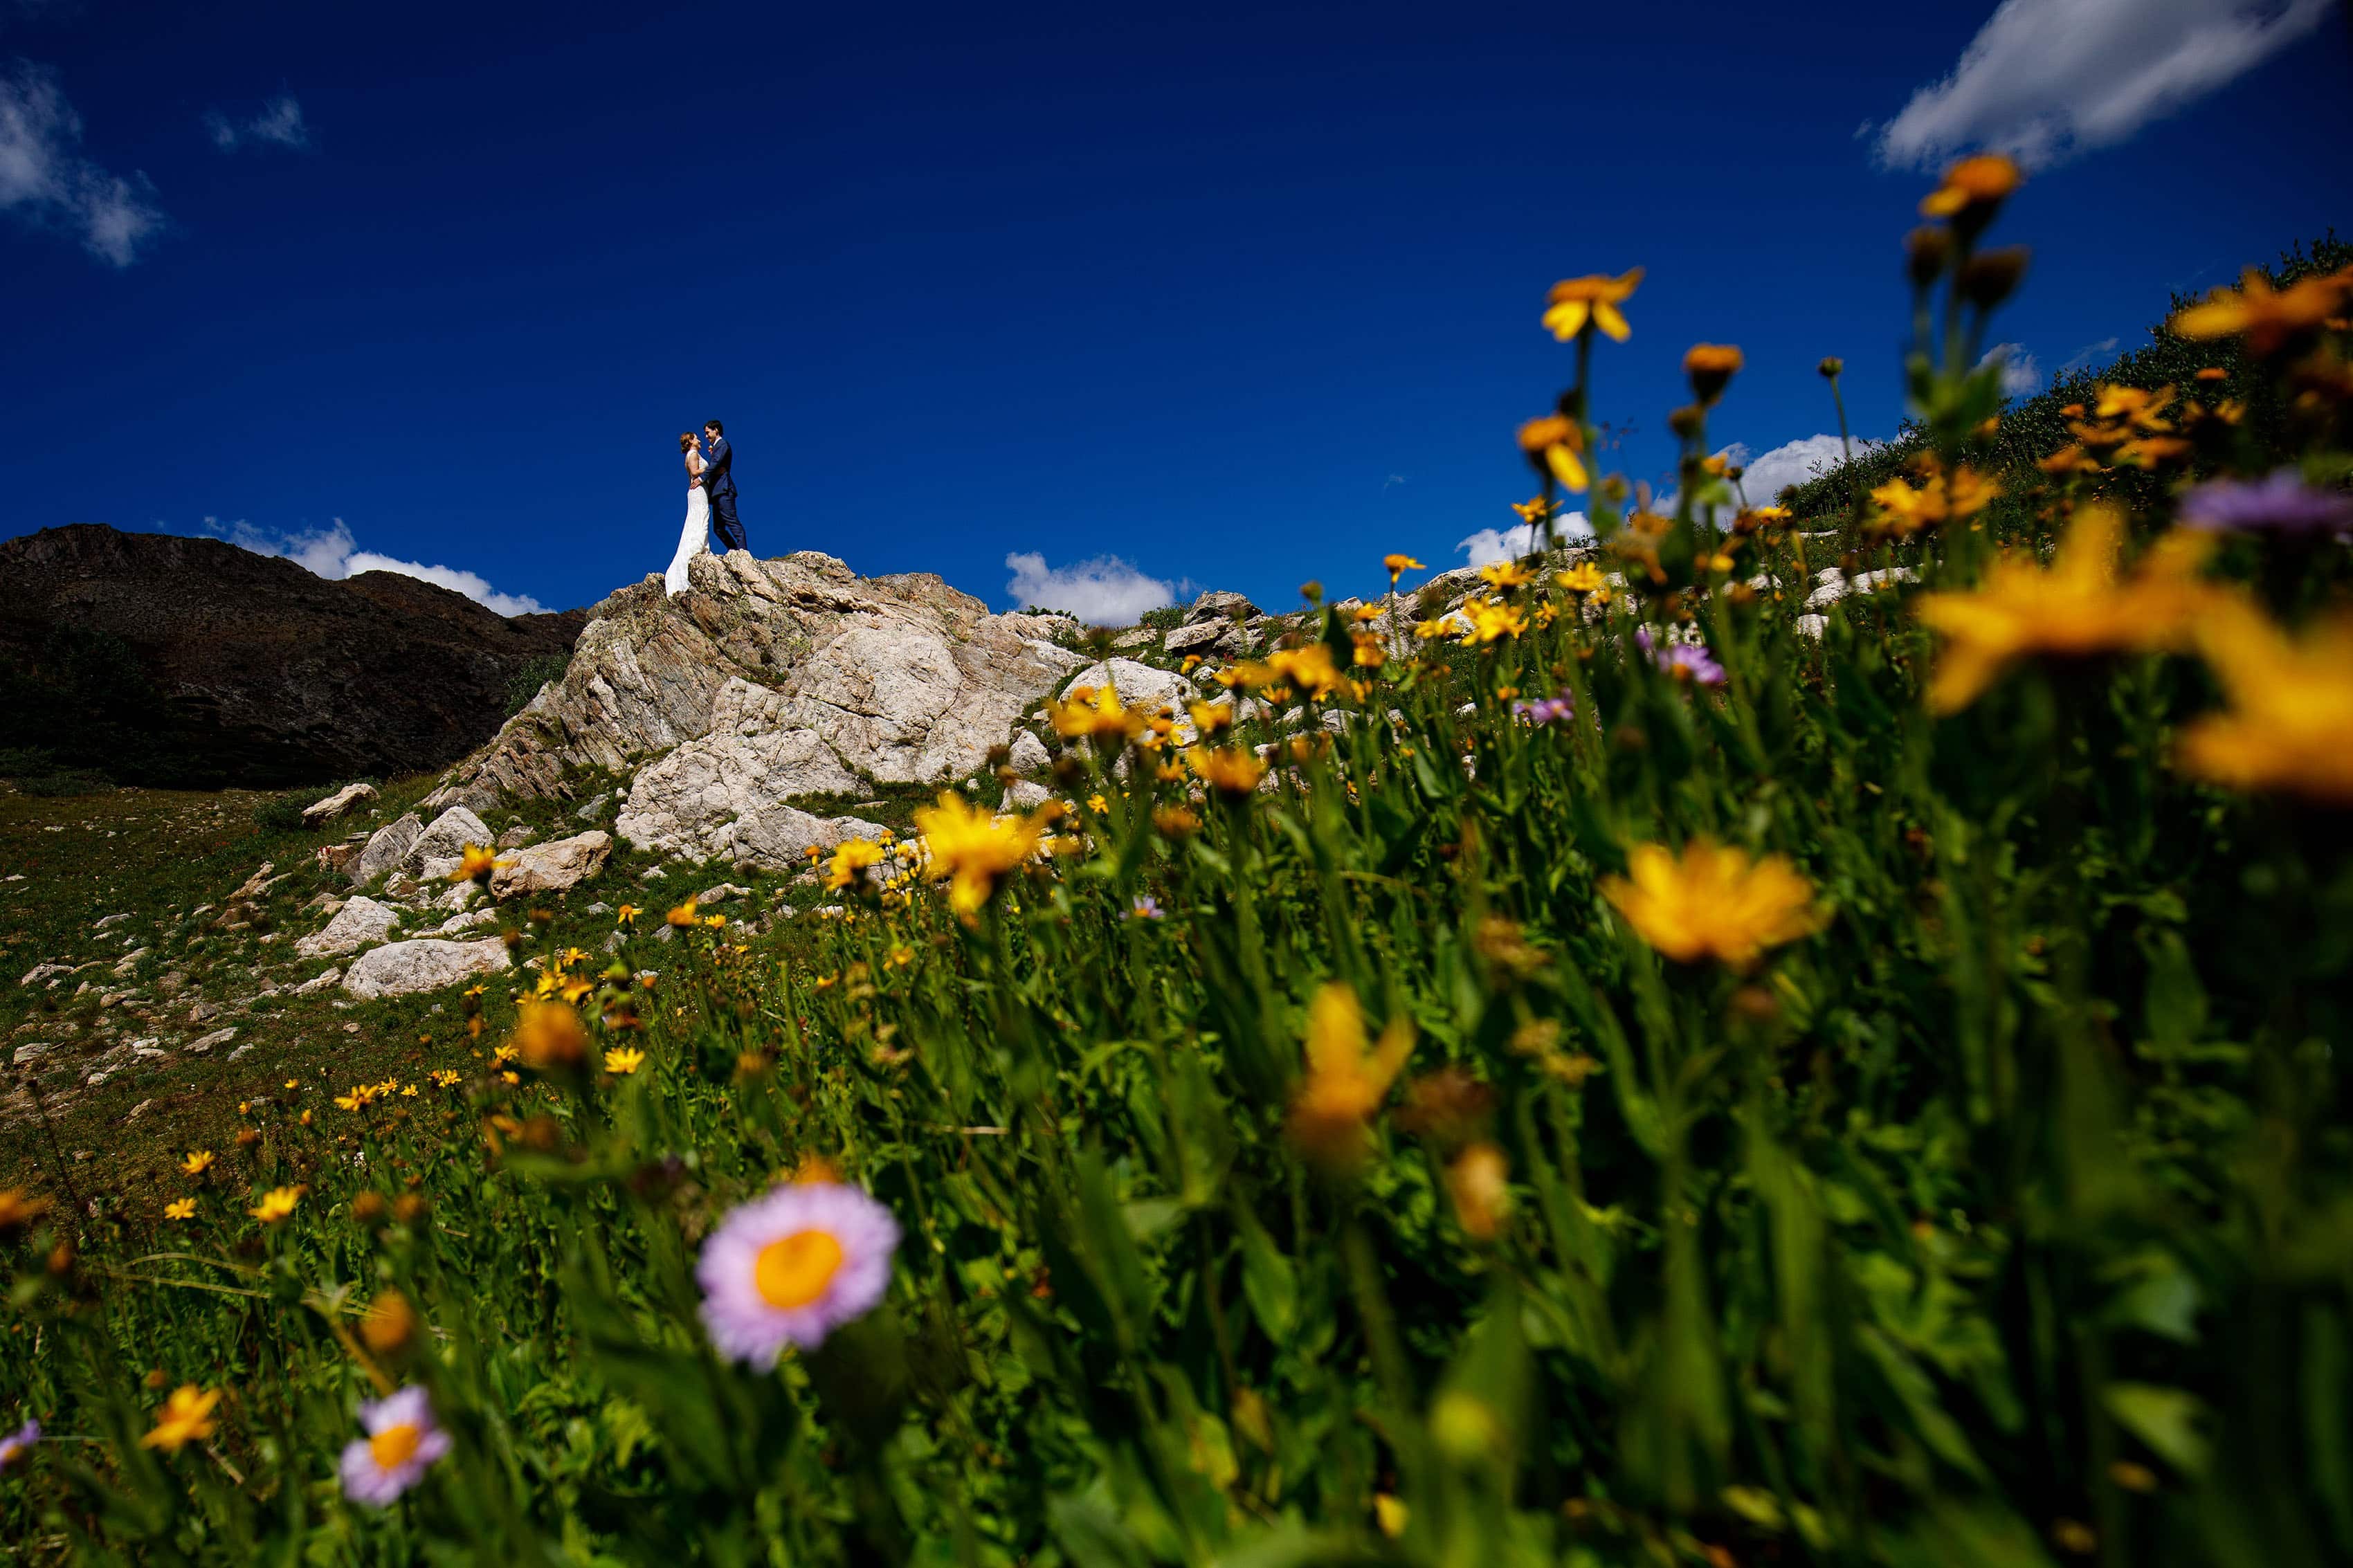 Wildflowers in full bloom as the bride and groom stand on a rock on Loveland Pass